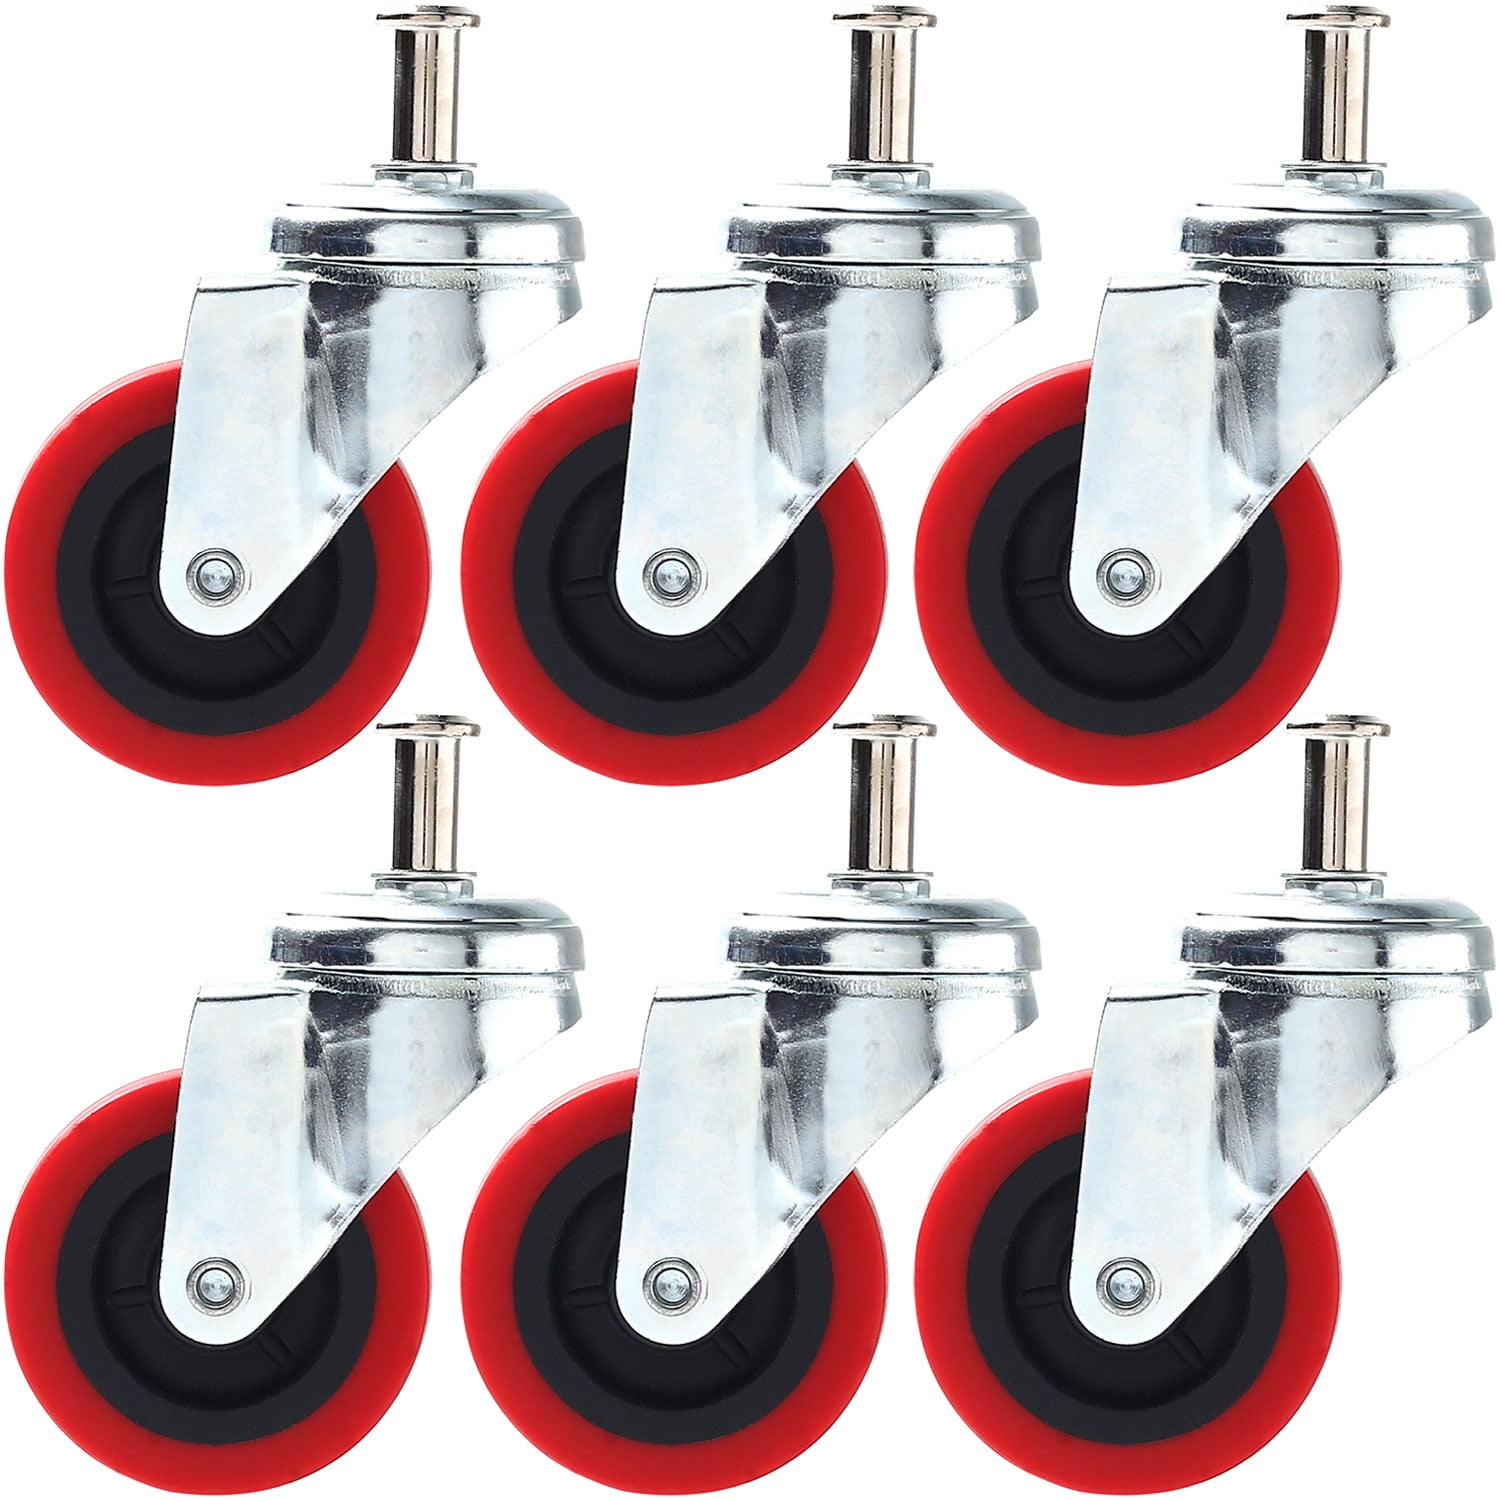 6 Pack 2" LOW PROFILE Swivel Caster Wheel For Creeper Service Cart Stool 